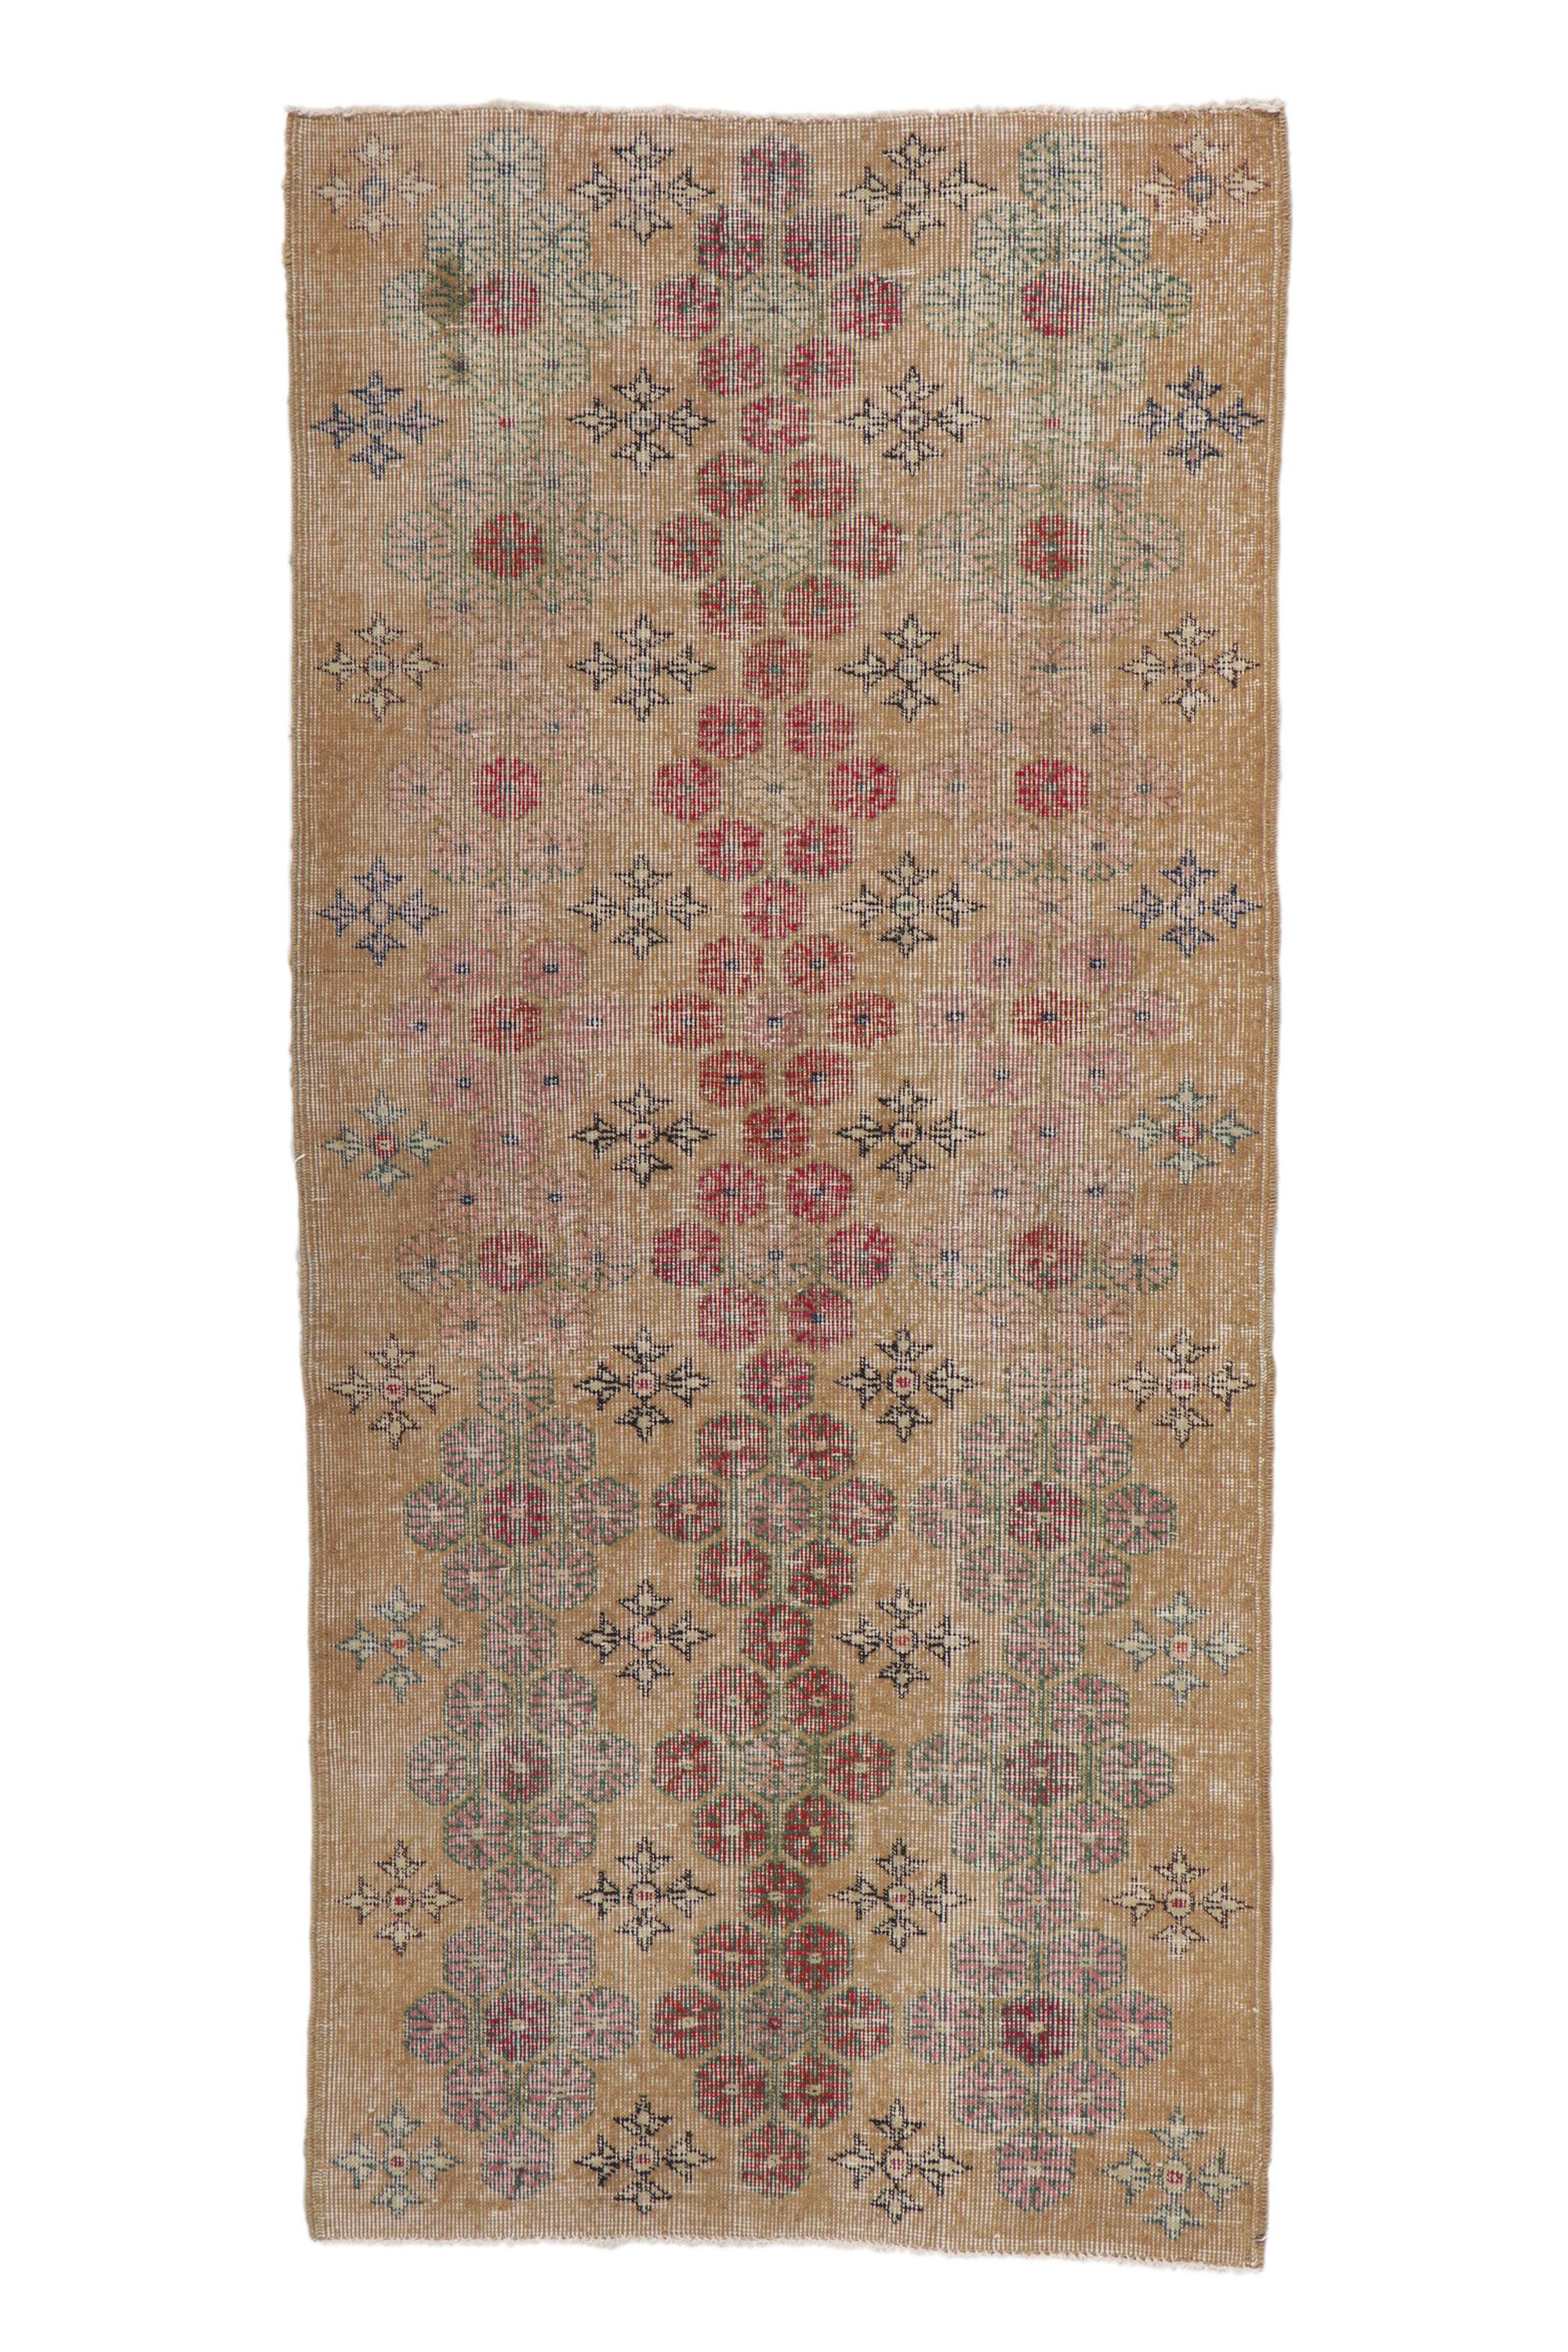 Distressed Vintage Turkish Sivas Rug with Rustic Arts and Crafts Style 2